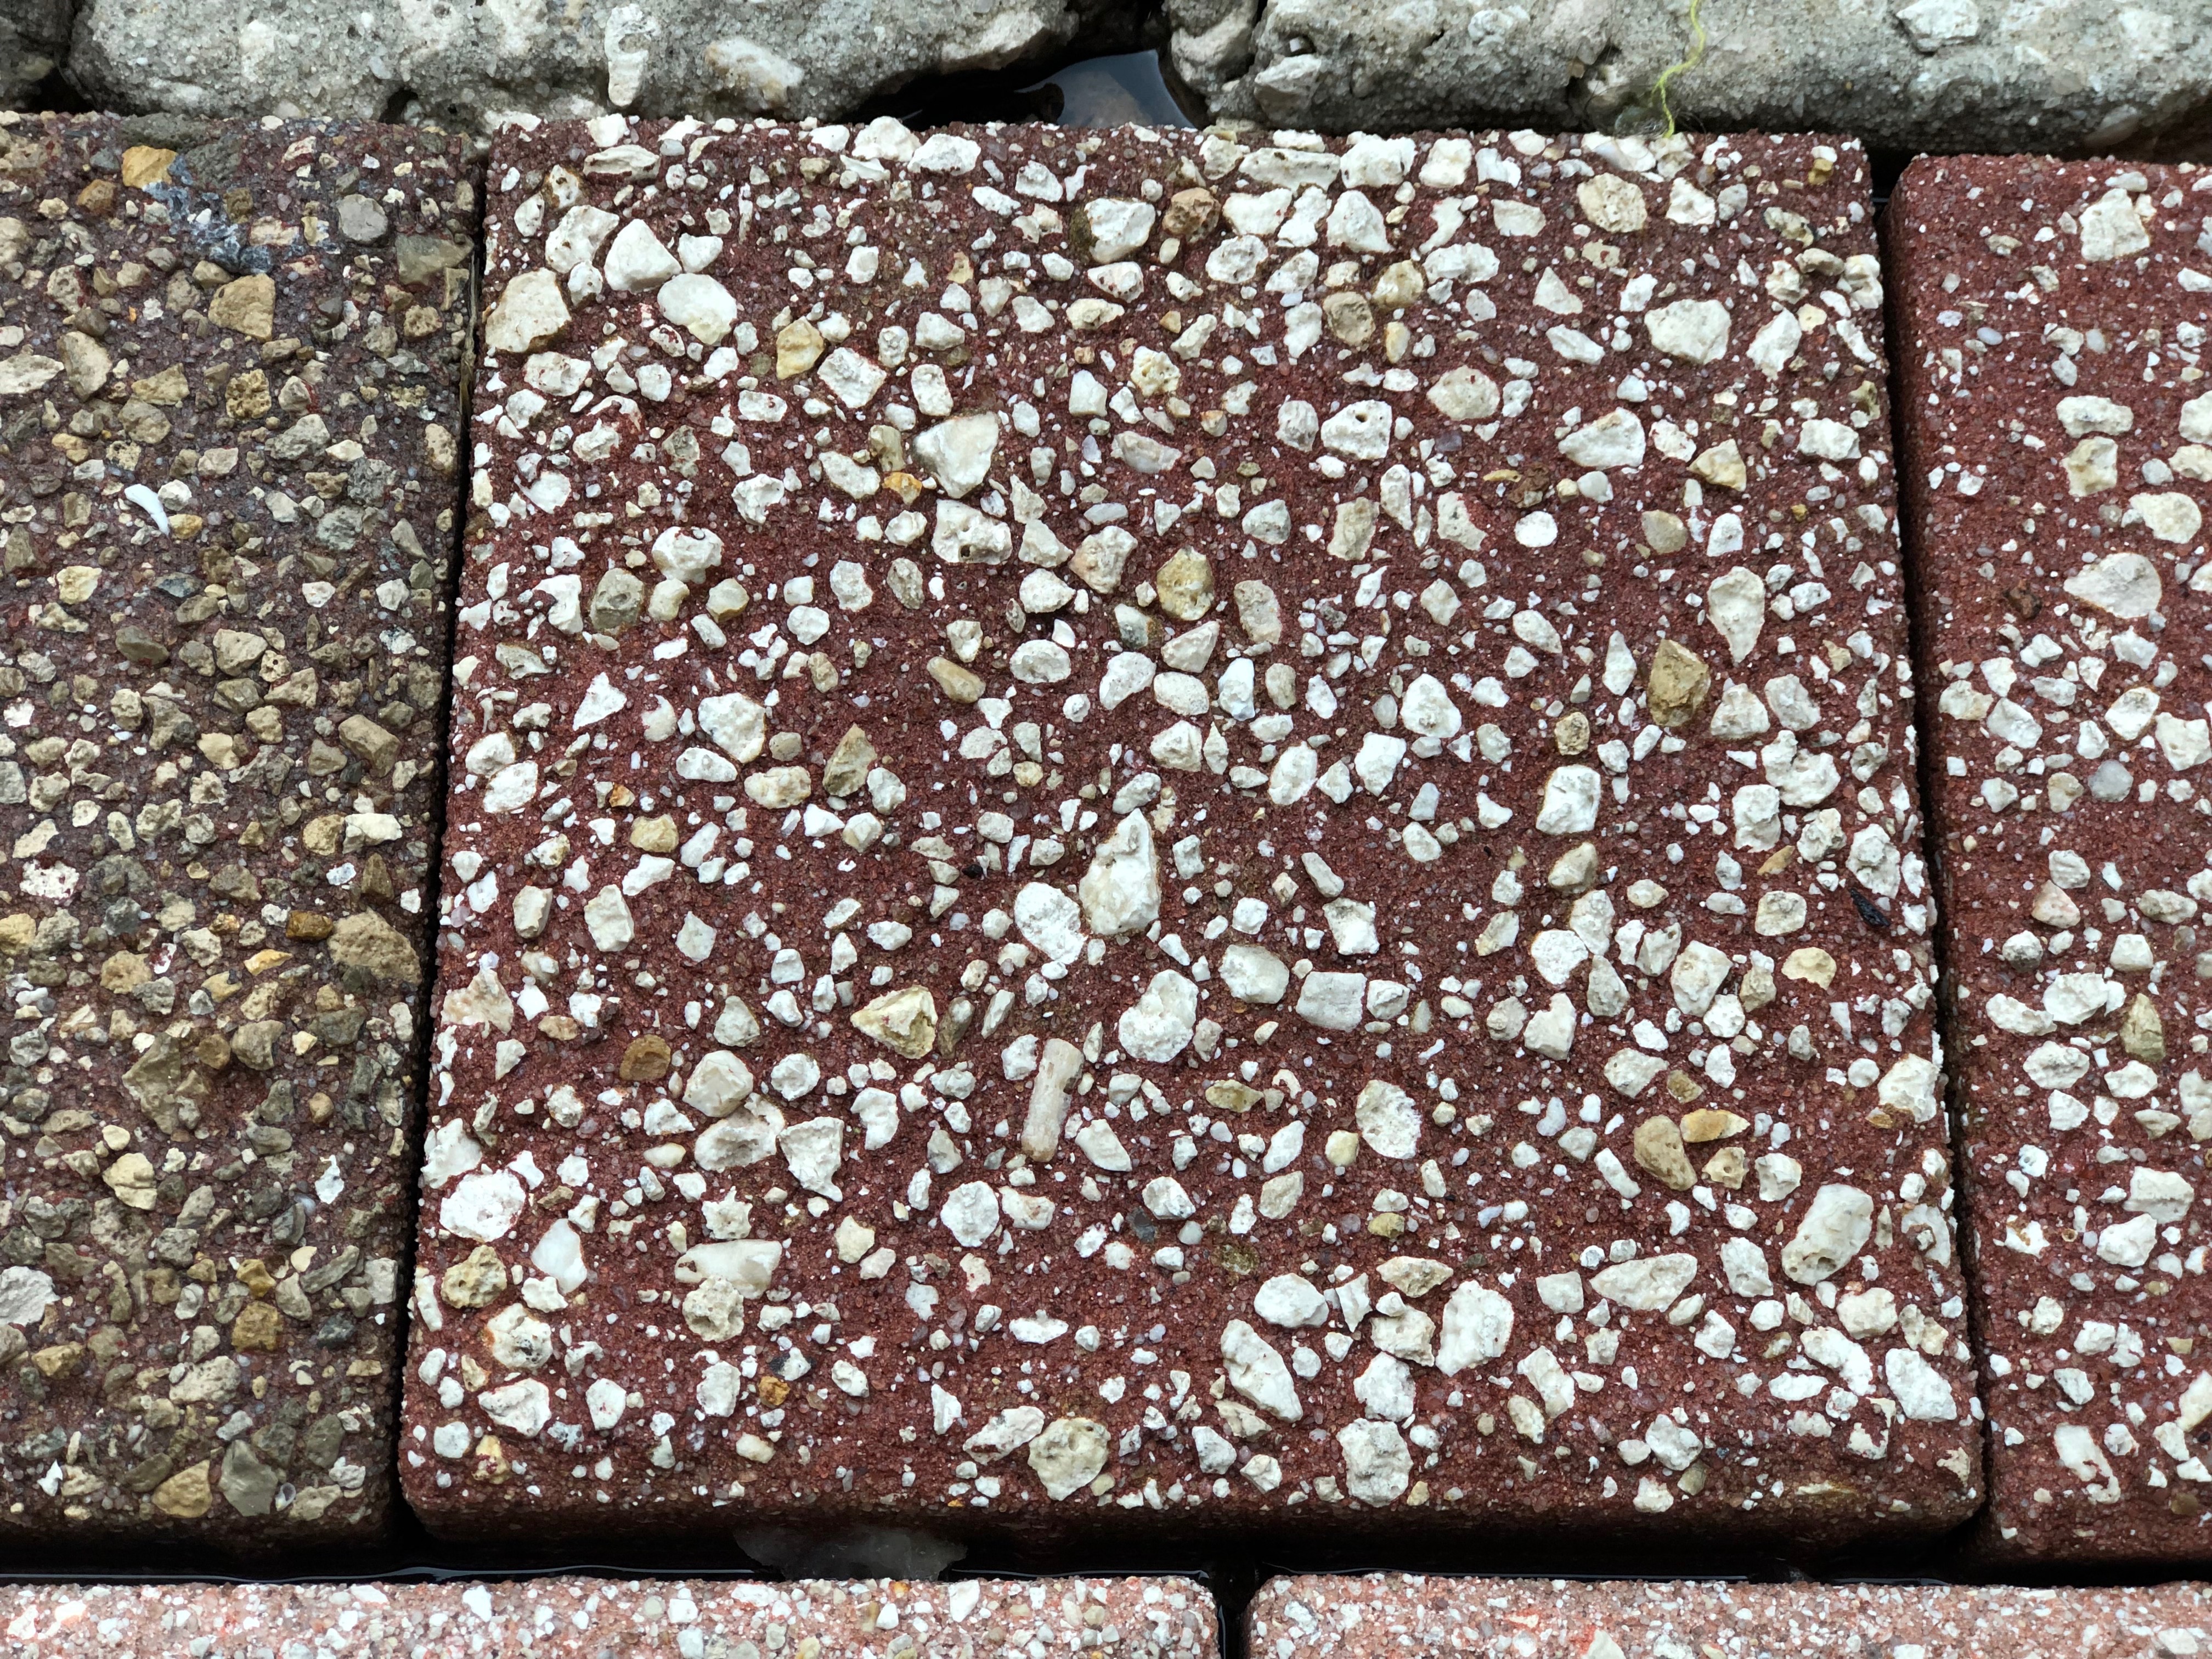 Paver showing signs of wear